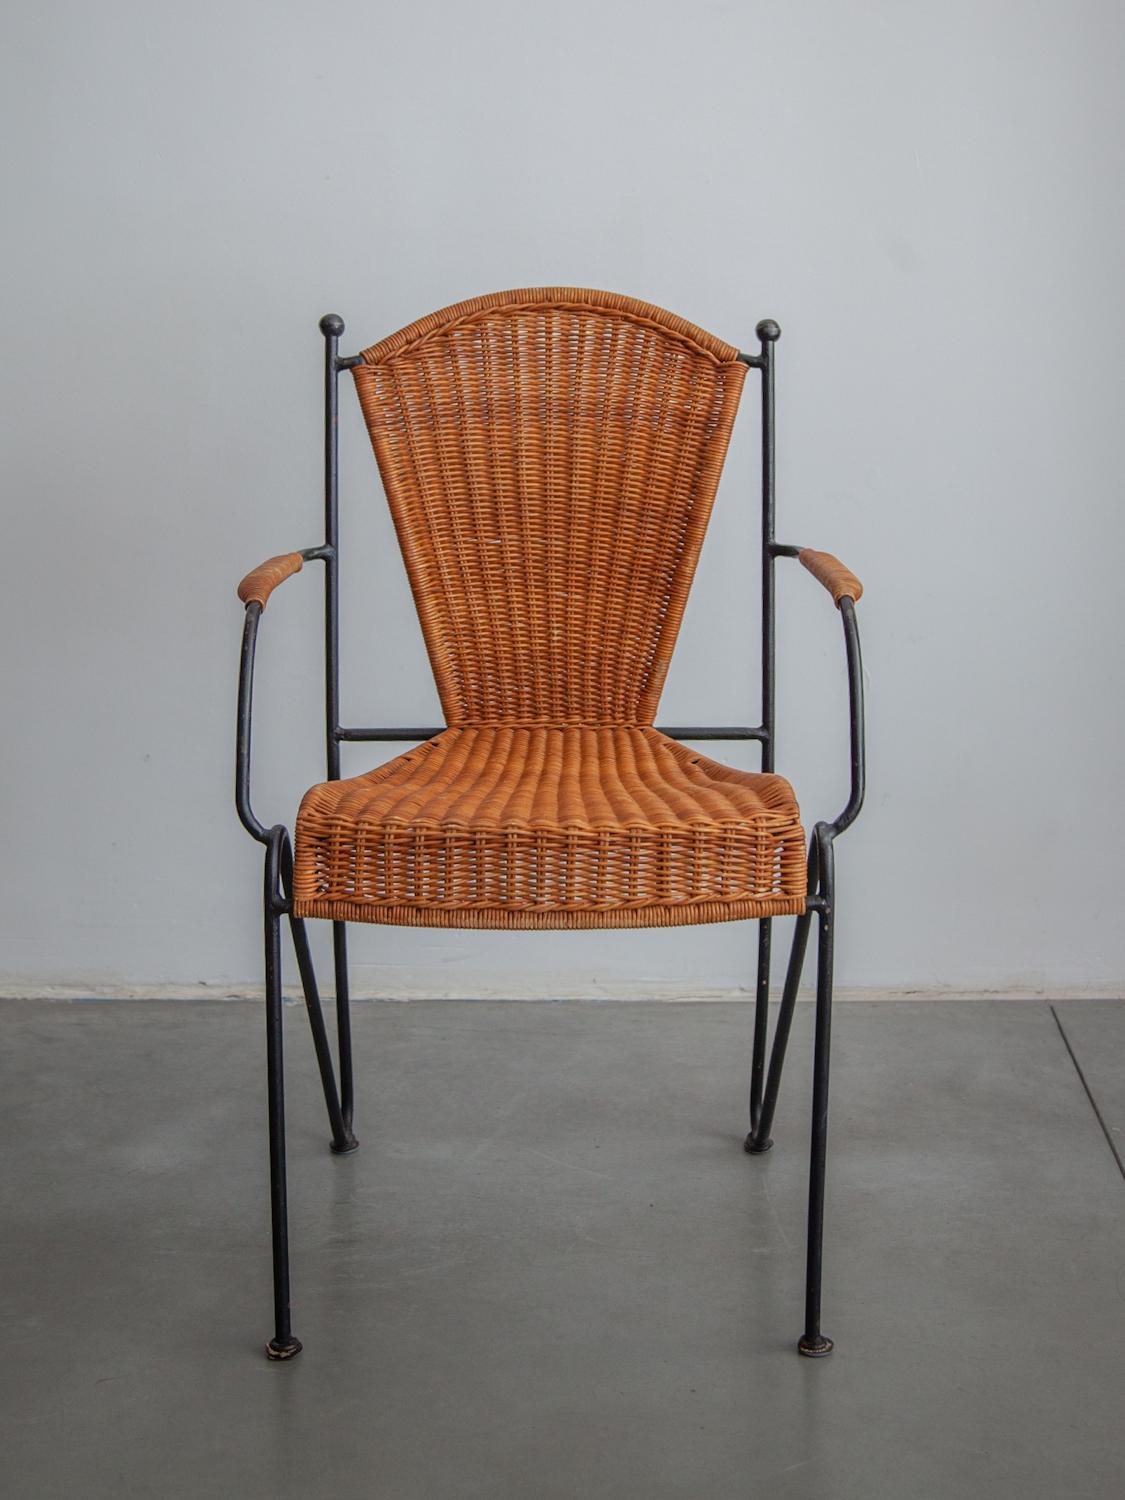 Six Iron and Rattan Indoor and Outdoor Patio Chairs by Pipsan Saarinen Swanson 11